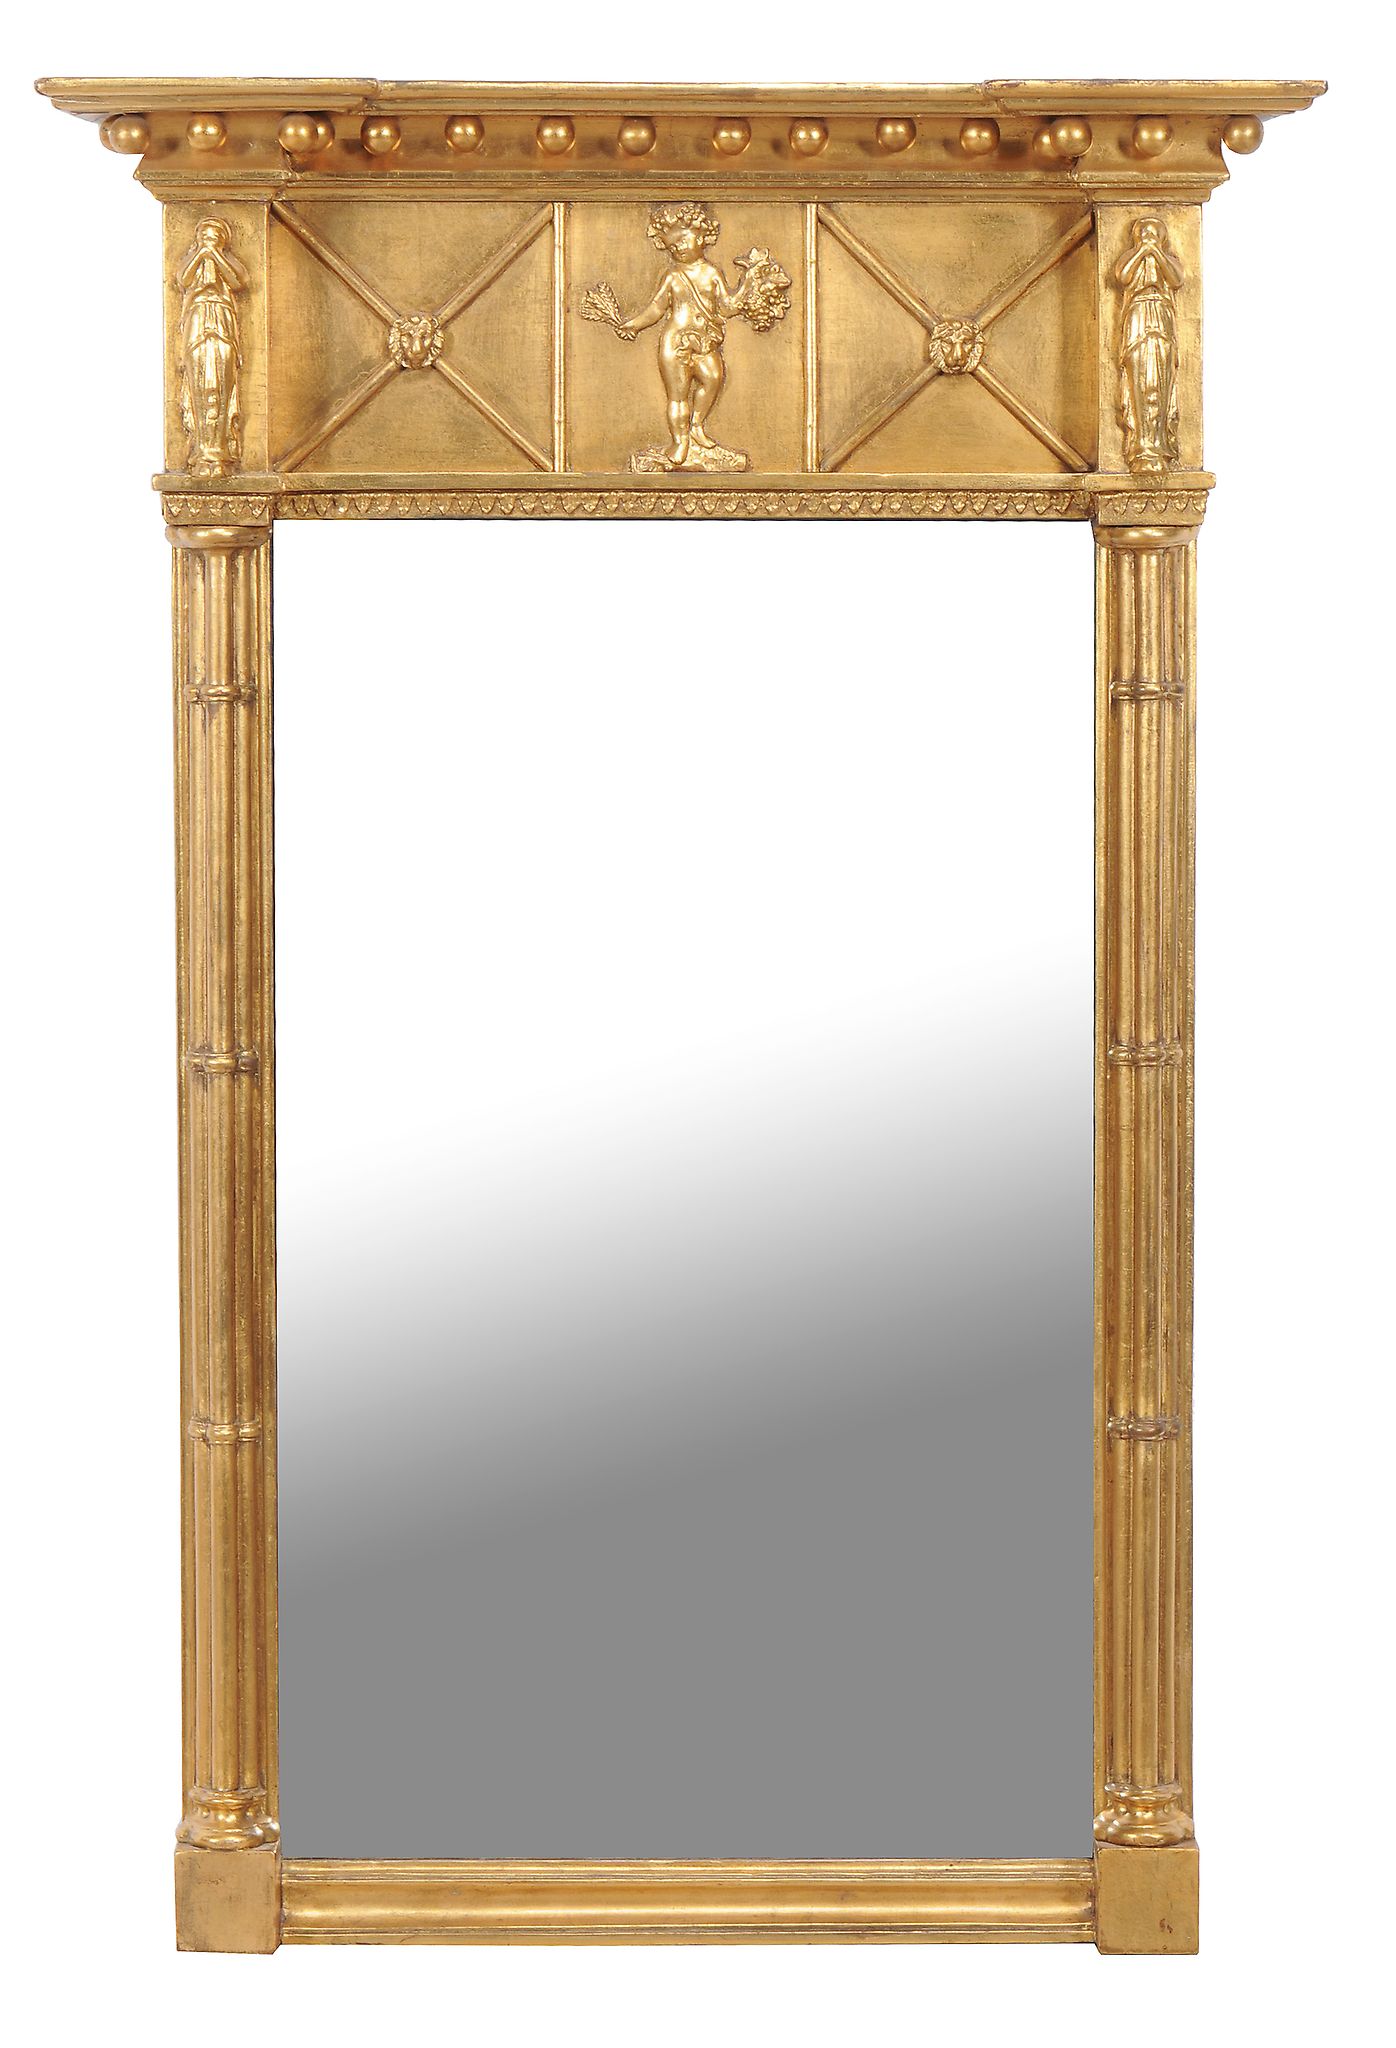 A Regency giltwood and composition pier mirror , circa 1815, with later bevelled mirror plate